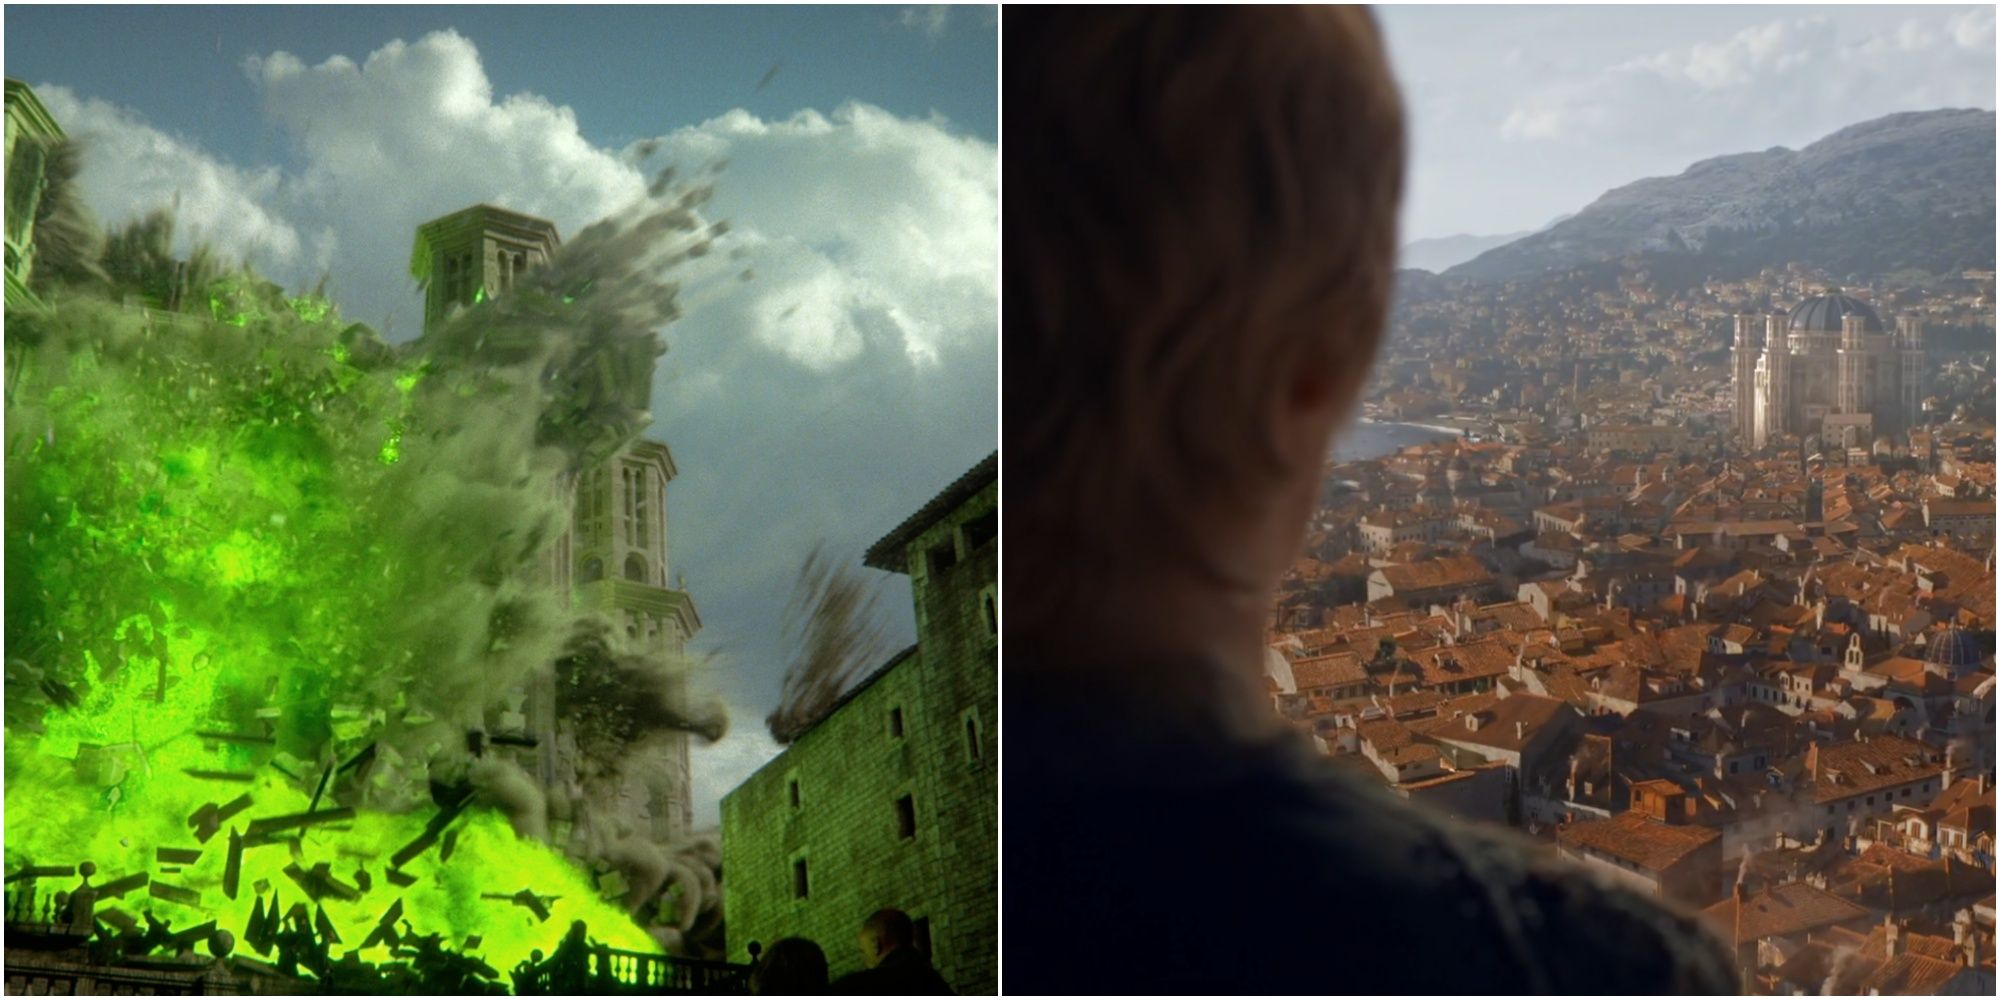 Split image of the destruction of the Great Sept of Baelor and Cersei watching the Sept from the Red Keep in Game of Thrones.